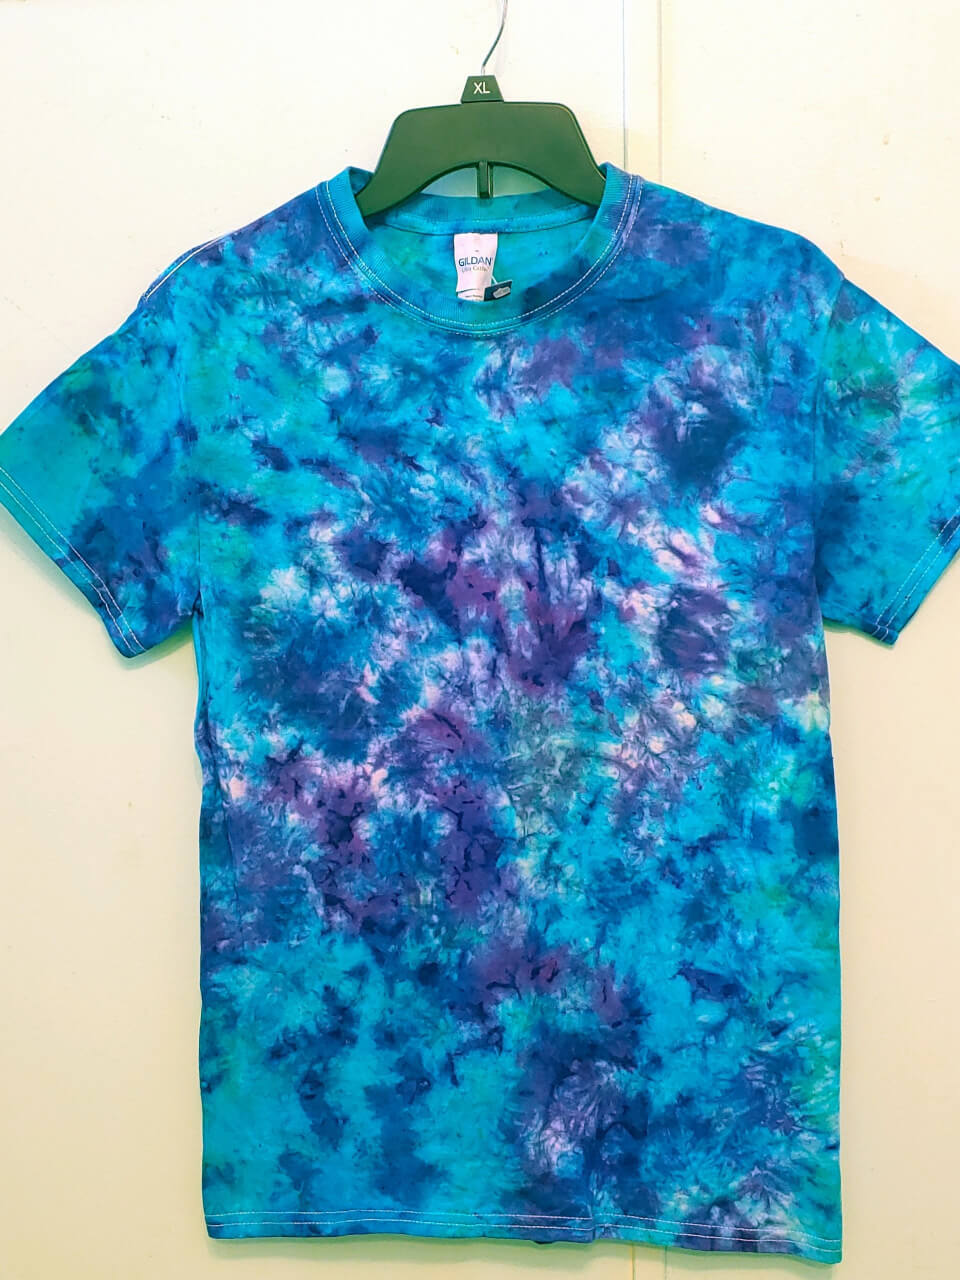 Adults Infants Great Gift Idea Toddlers All Different Colors and Sizes Available Pick Your Size and Colors. Custom Tie Dye Shirts